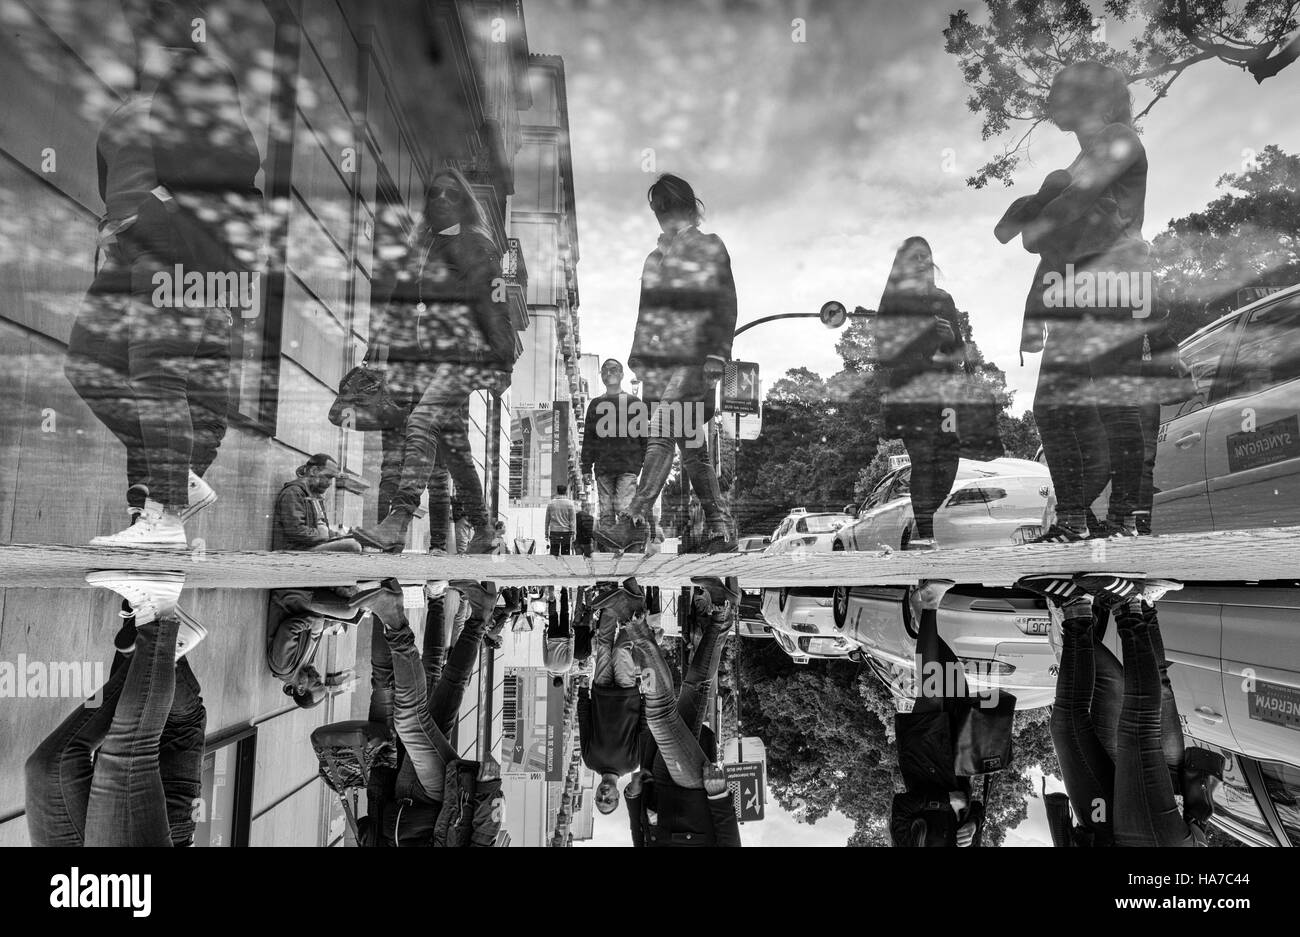 People reflected in water. Malaga, Andalusia, Spain. Stock Photo